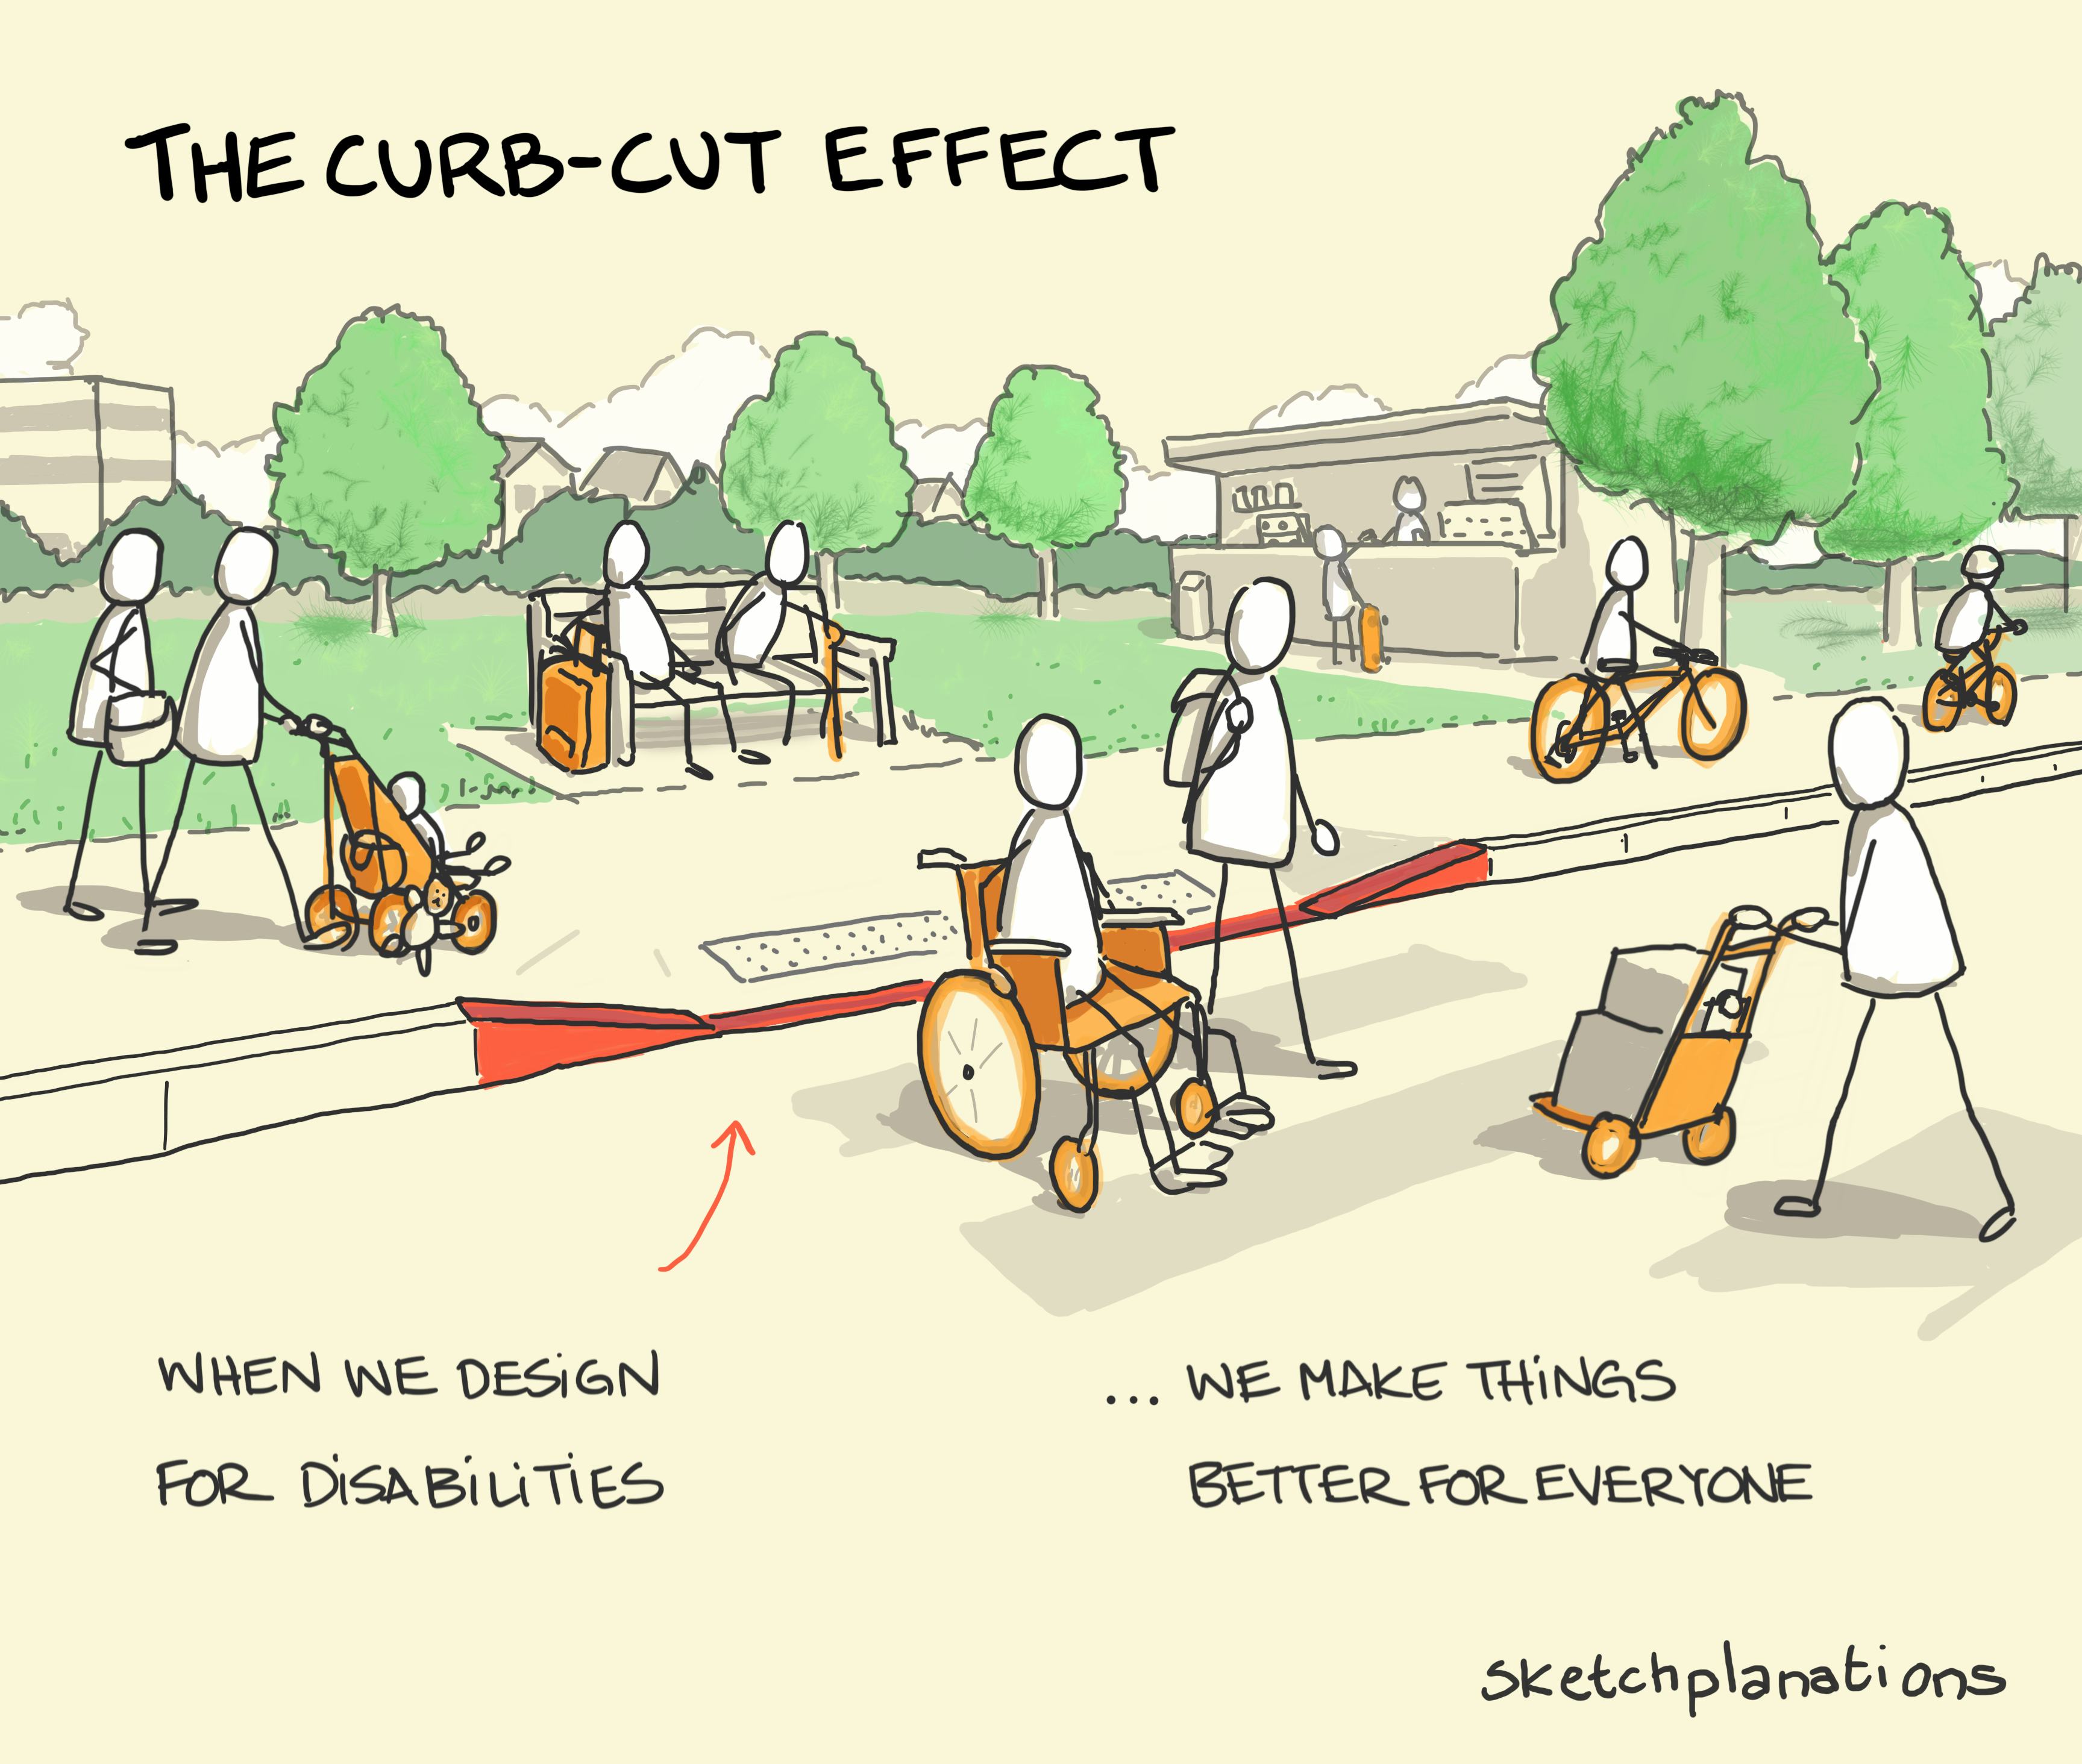 The curb-cut effect: A range of people of all ages next to a crossing, road, and park show how the curb cut design for disabilities benefits everyone